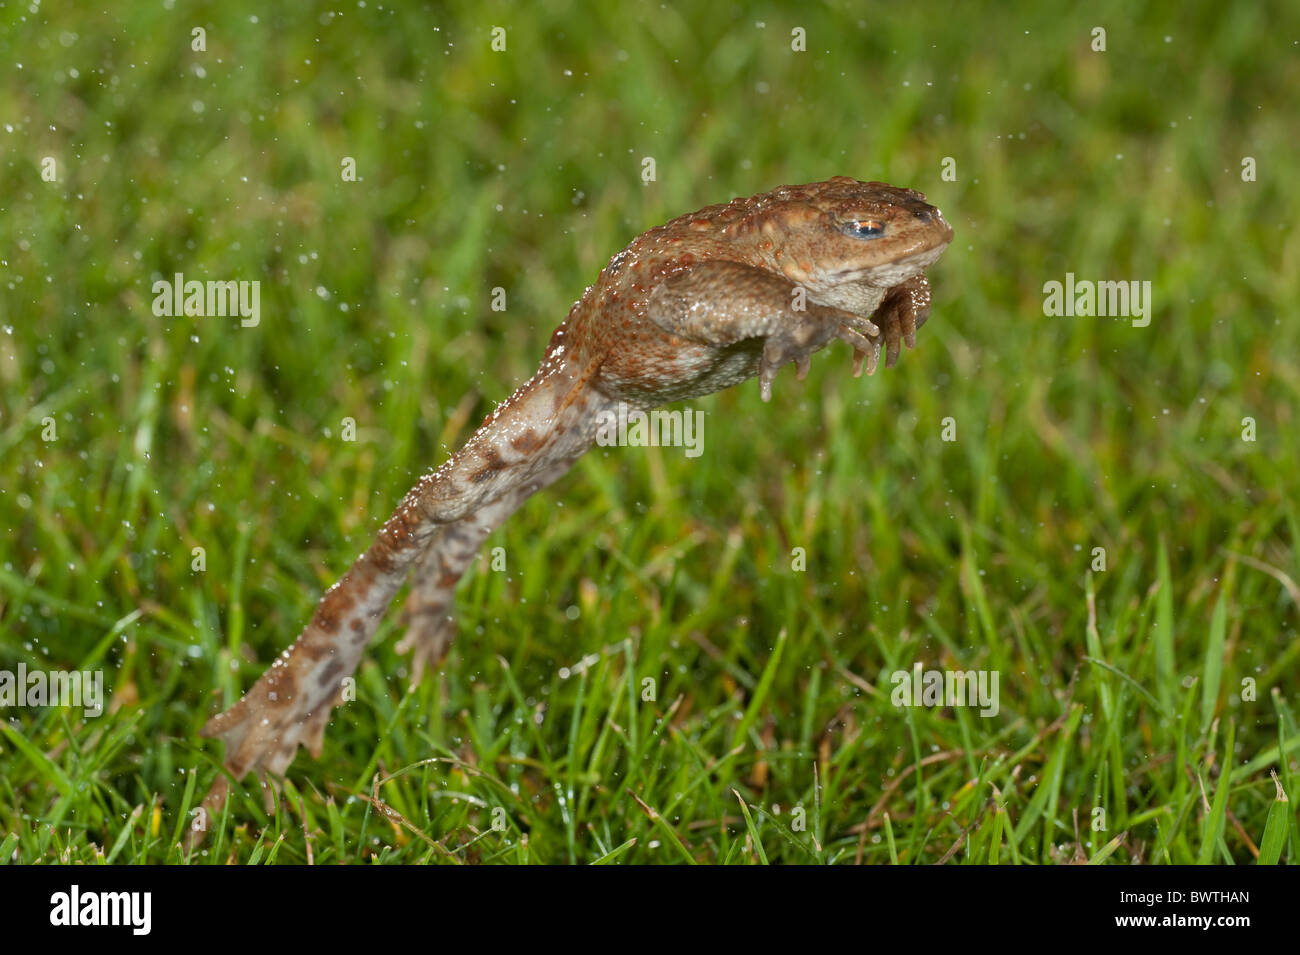 Common Toad leaping Bufo bufo UK Stock Photo